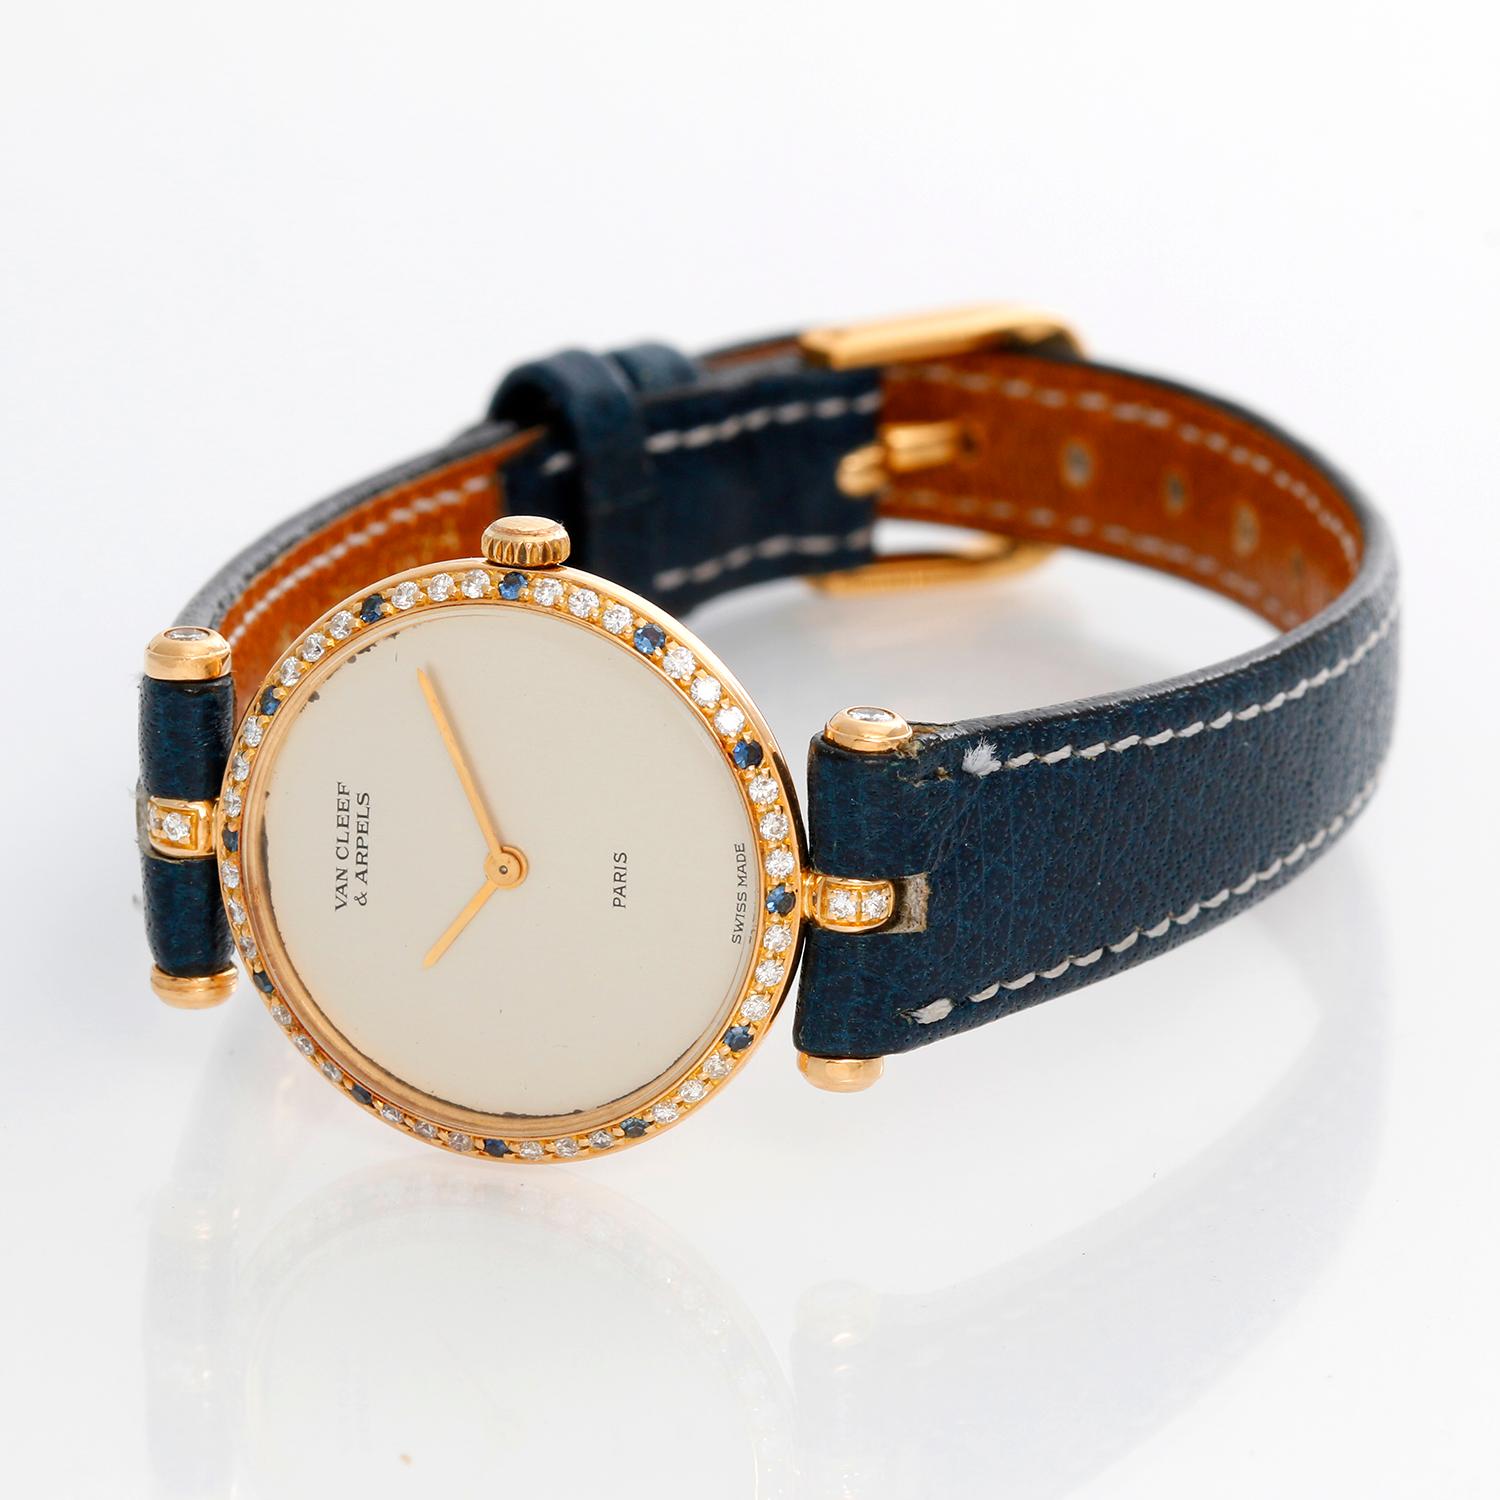 Van Cleef & Arpels Classic Yellow Gold Watch - Quartz. 18K Yellow gold with Diamond and Sapphire bezel ( 24 mm ). Silver dial. Blue leather strap with tang buckle. Pre-owned with custom box . 